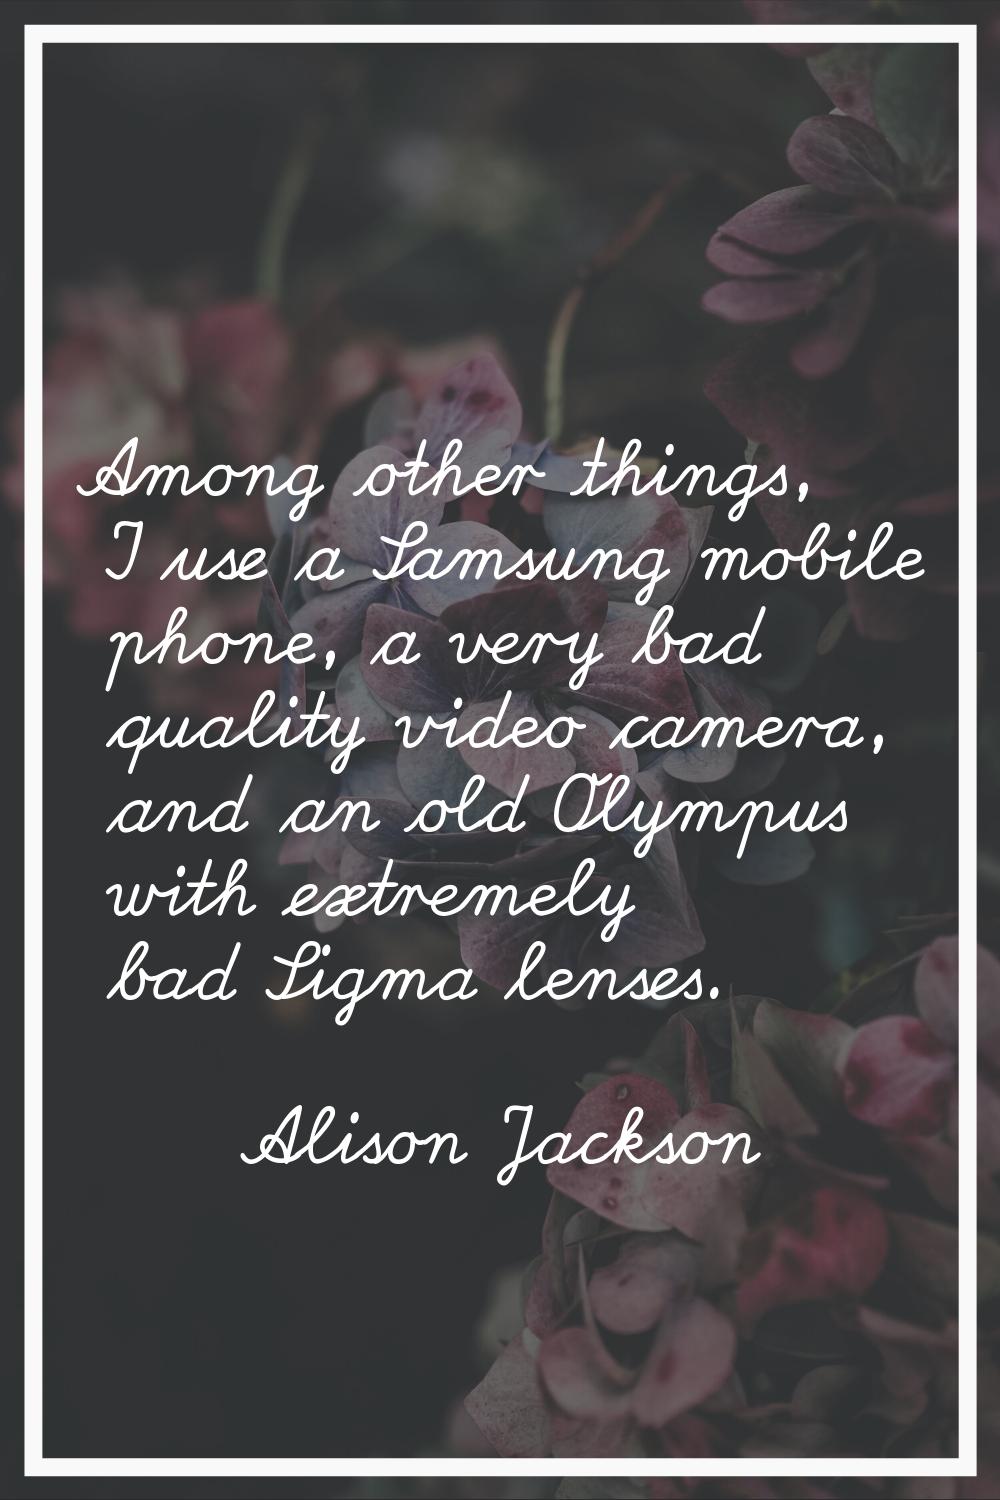 Among other things, I use a Samsung mobile phone, a very bad quality video camera, and an old Olymp